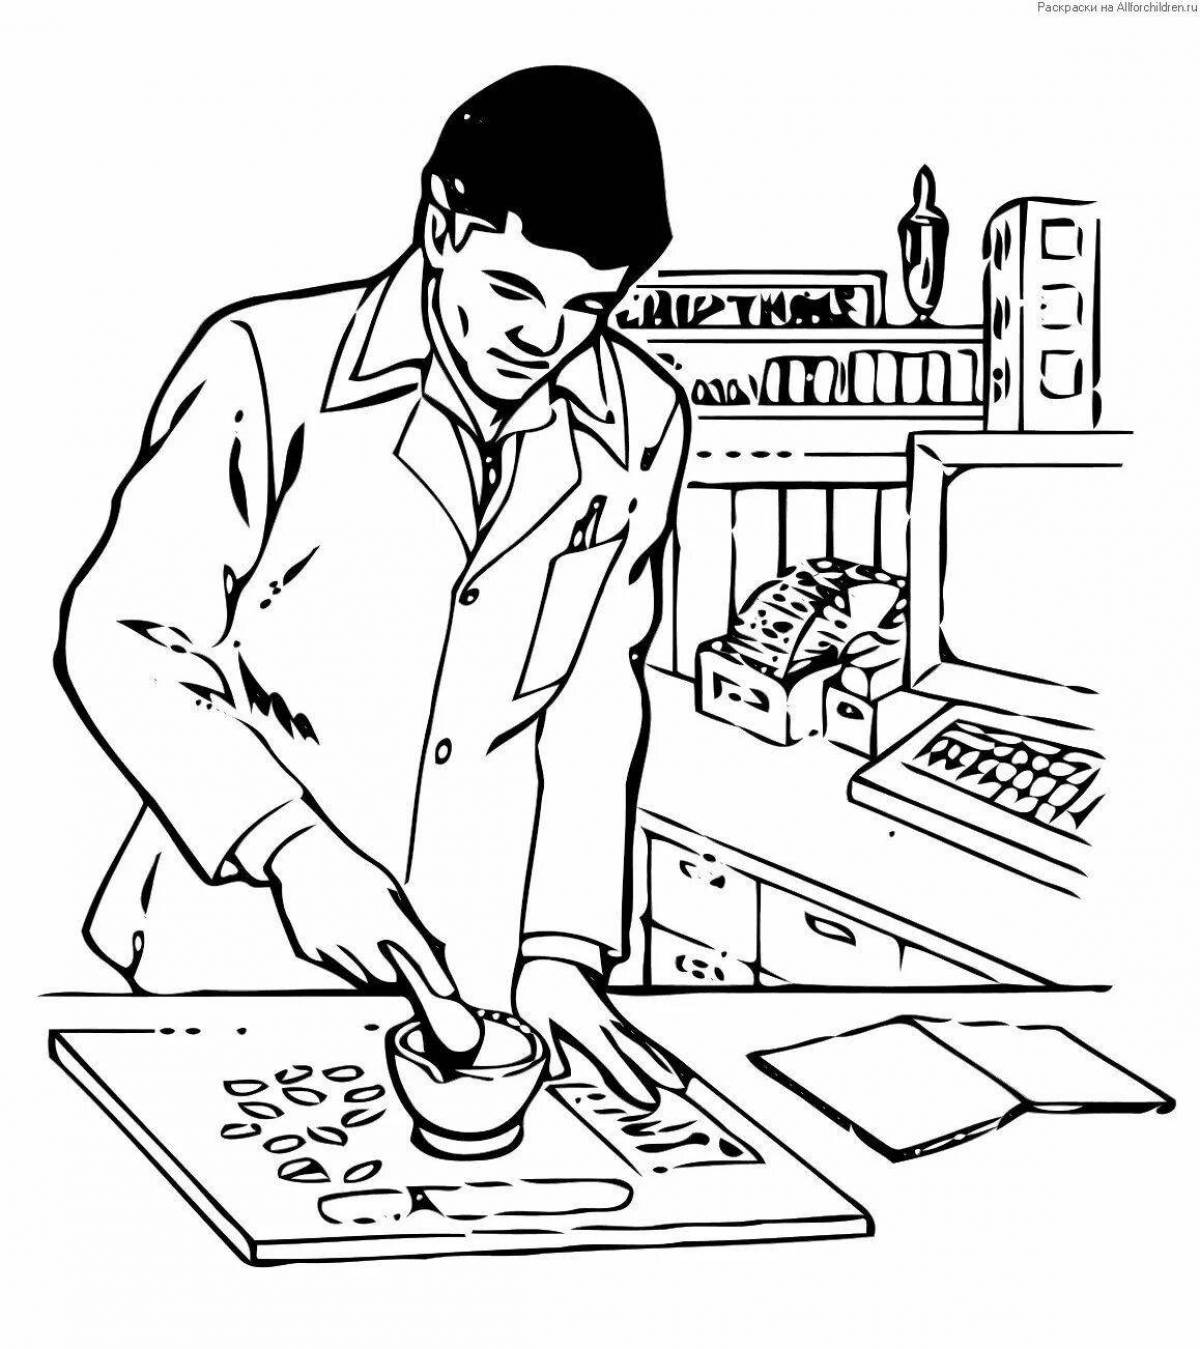 Coloring page happy apothecary